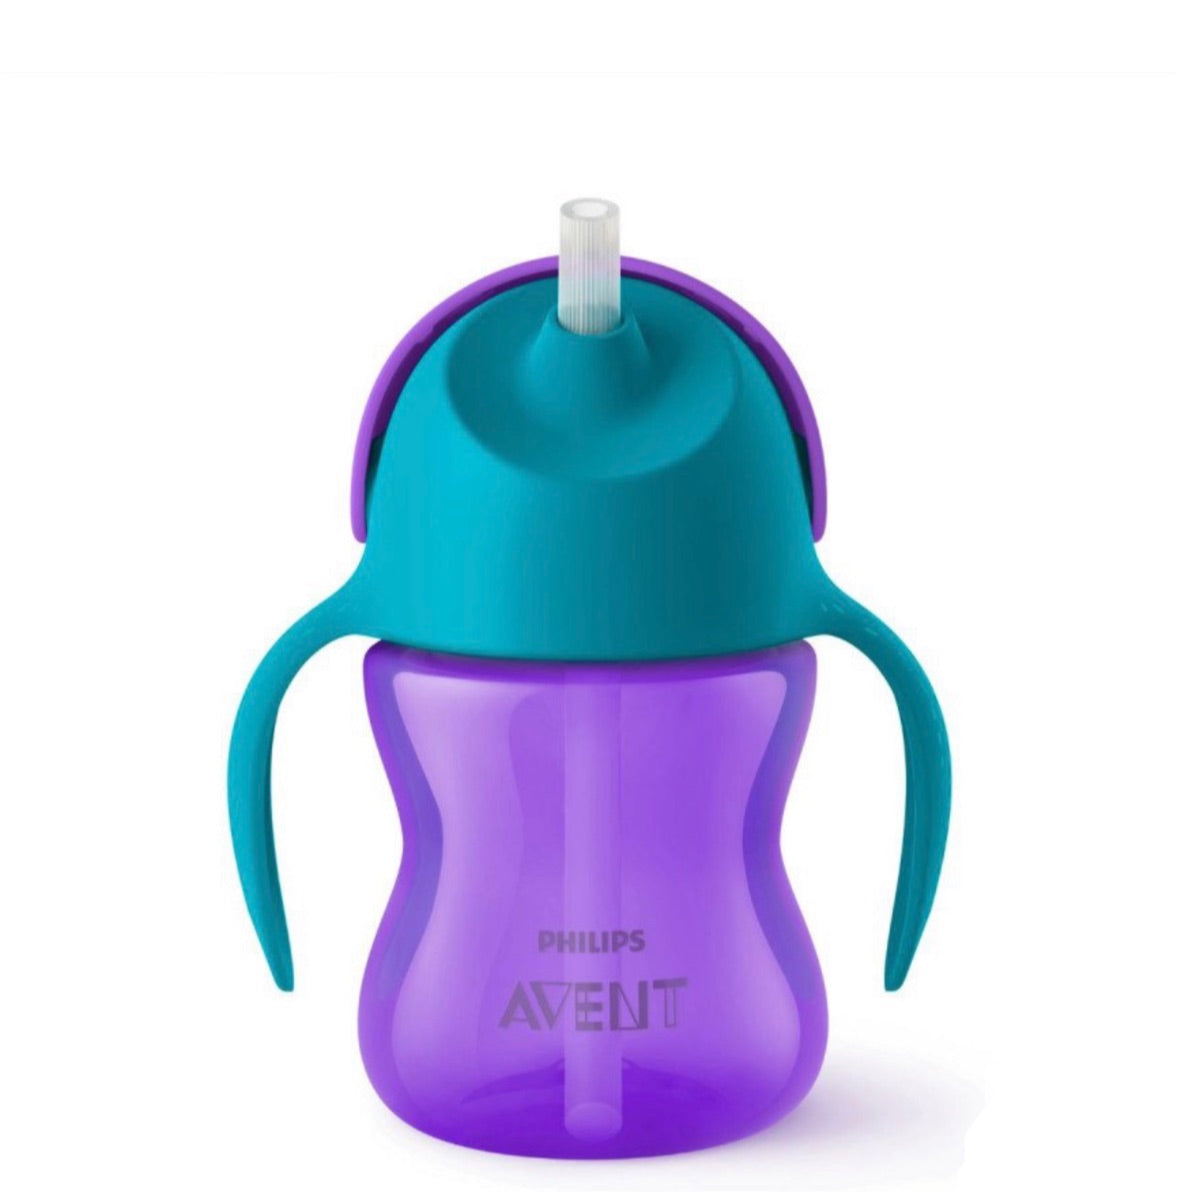 AVENT Philips Avent Straw Cups (SCF796/00) - 9 Months +